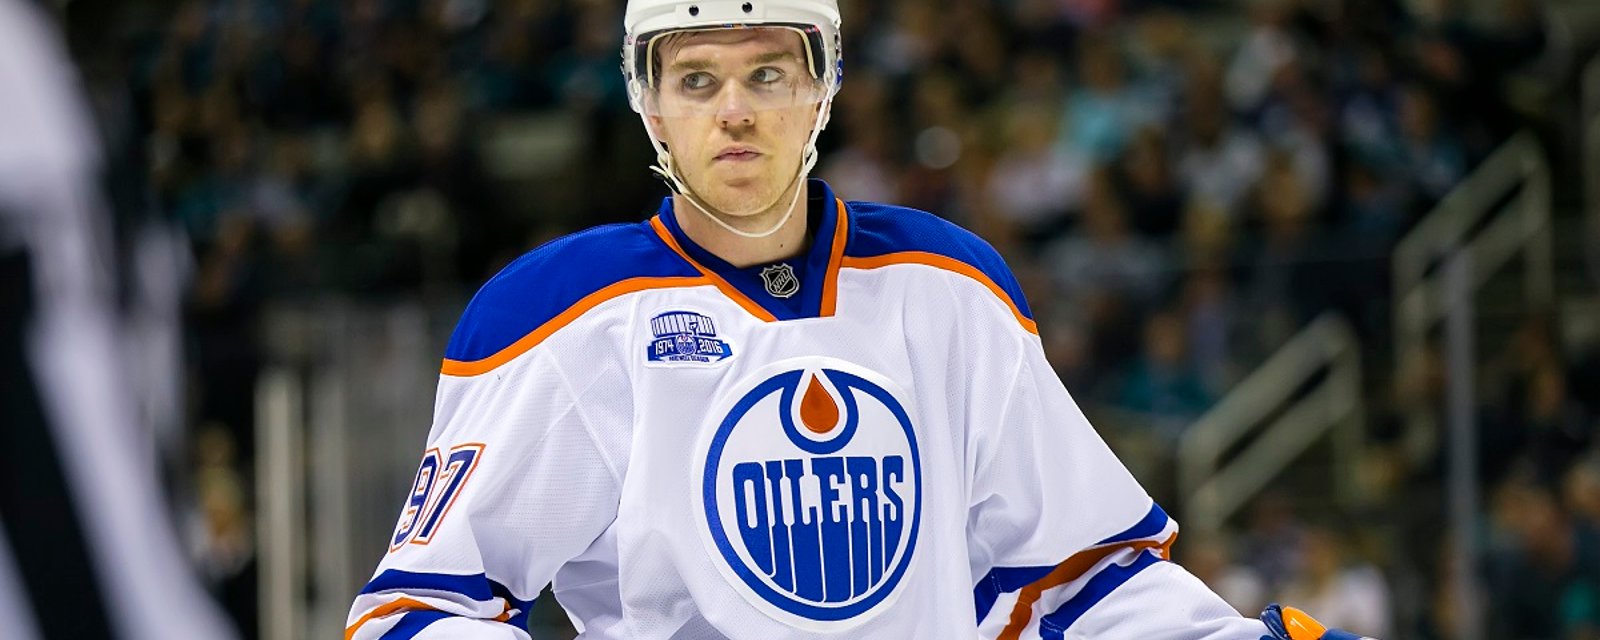 Breaking: Absolutely insane rumors of McDavid's new contract!